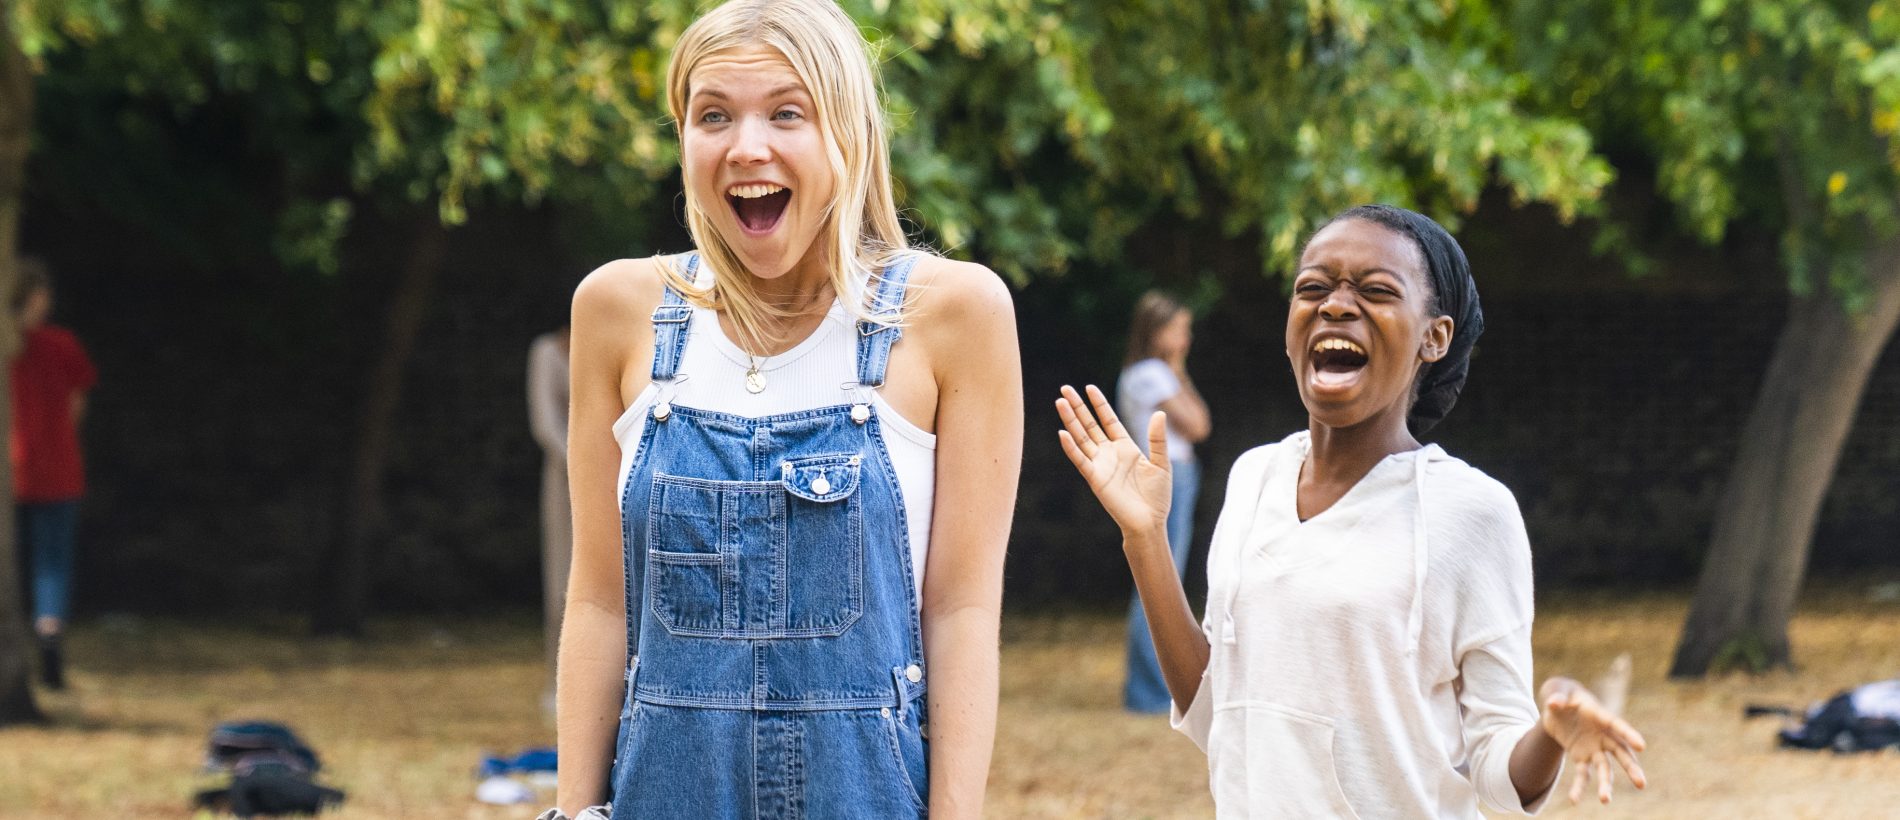 A student with shoulder length blond hair stands outside wearing denim overalls and a white t shirt. Her mouth is agape in surprise and delight. Behind her another student wearing a white jumper and blue joggers outstretches her arms and laughs.